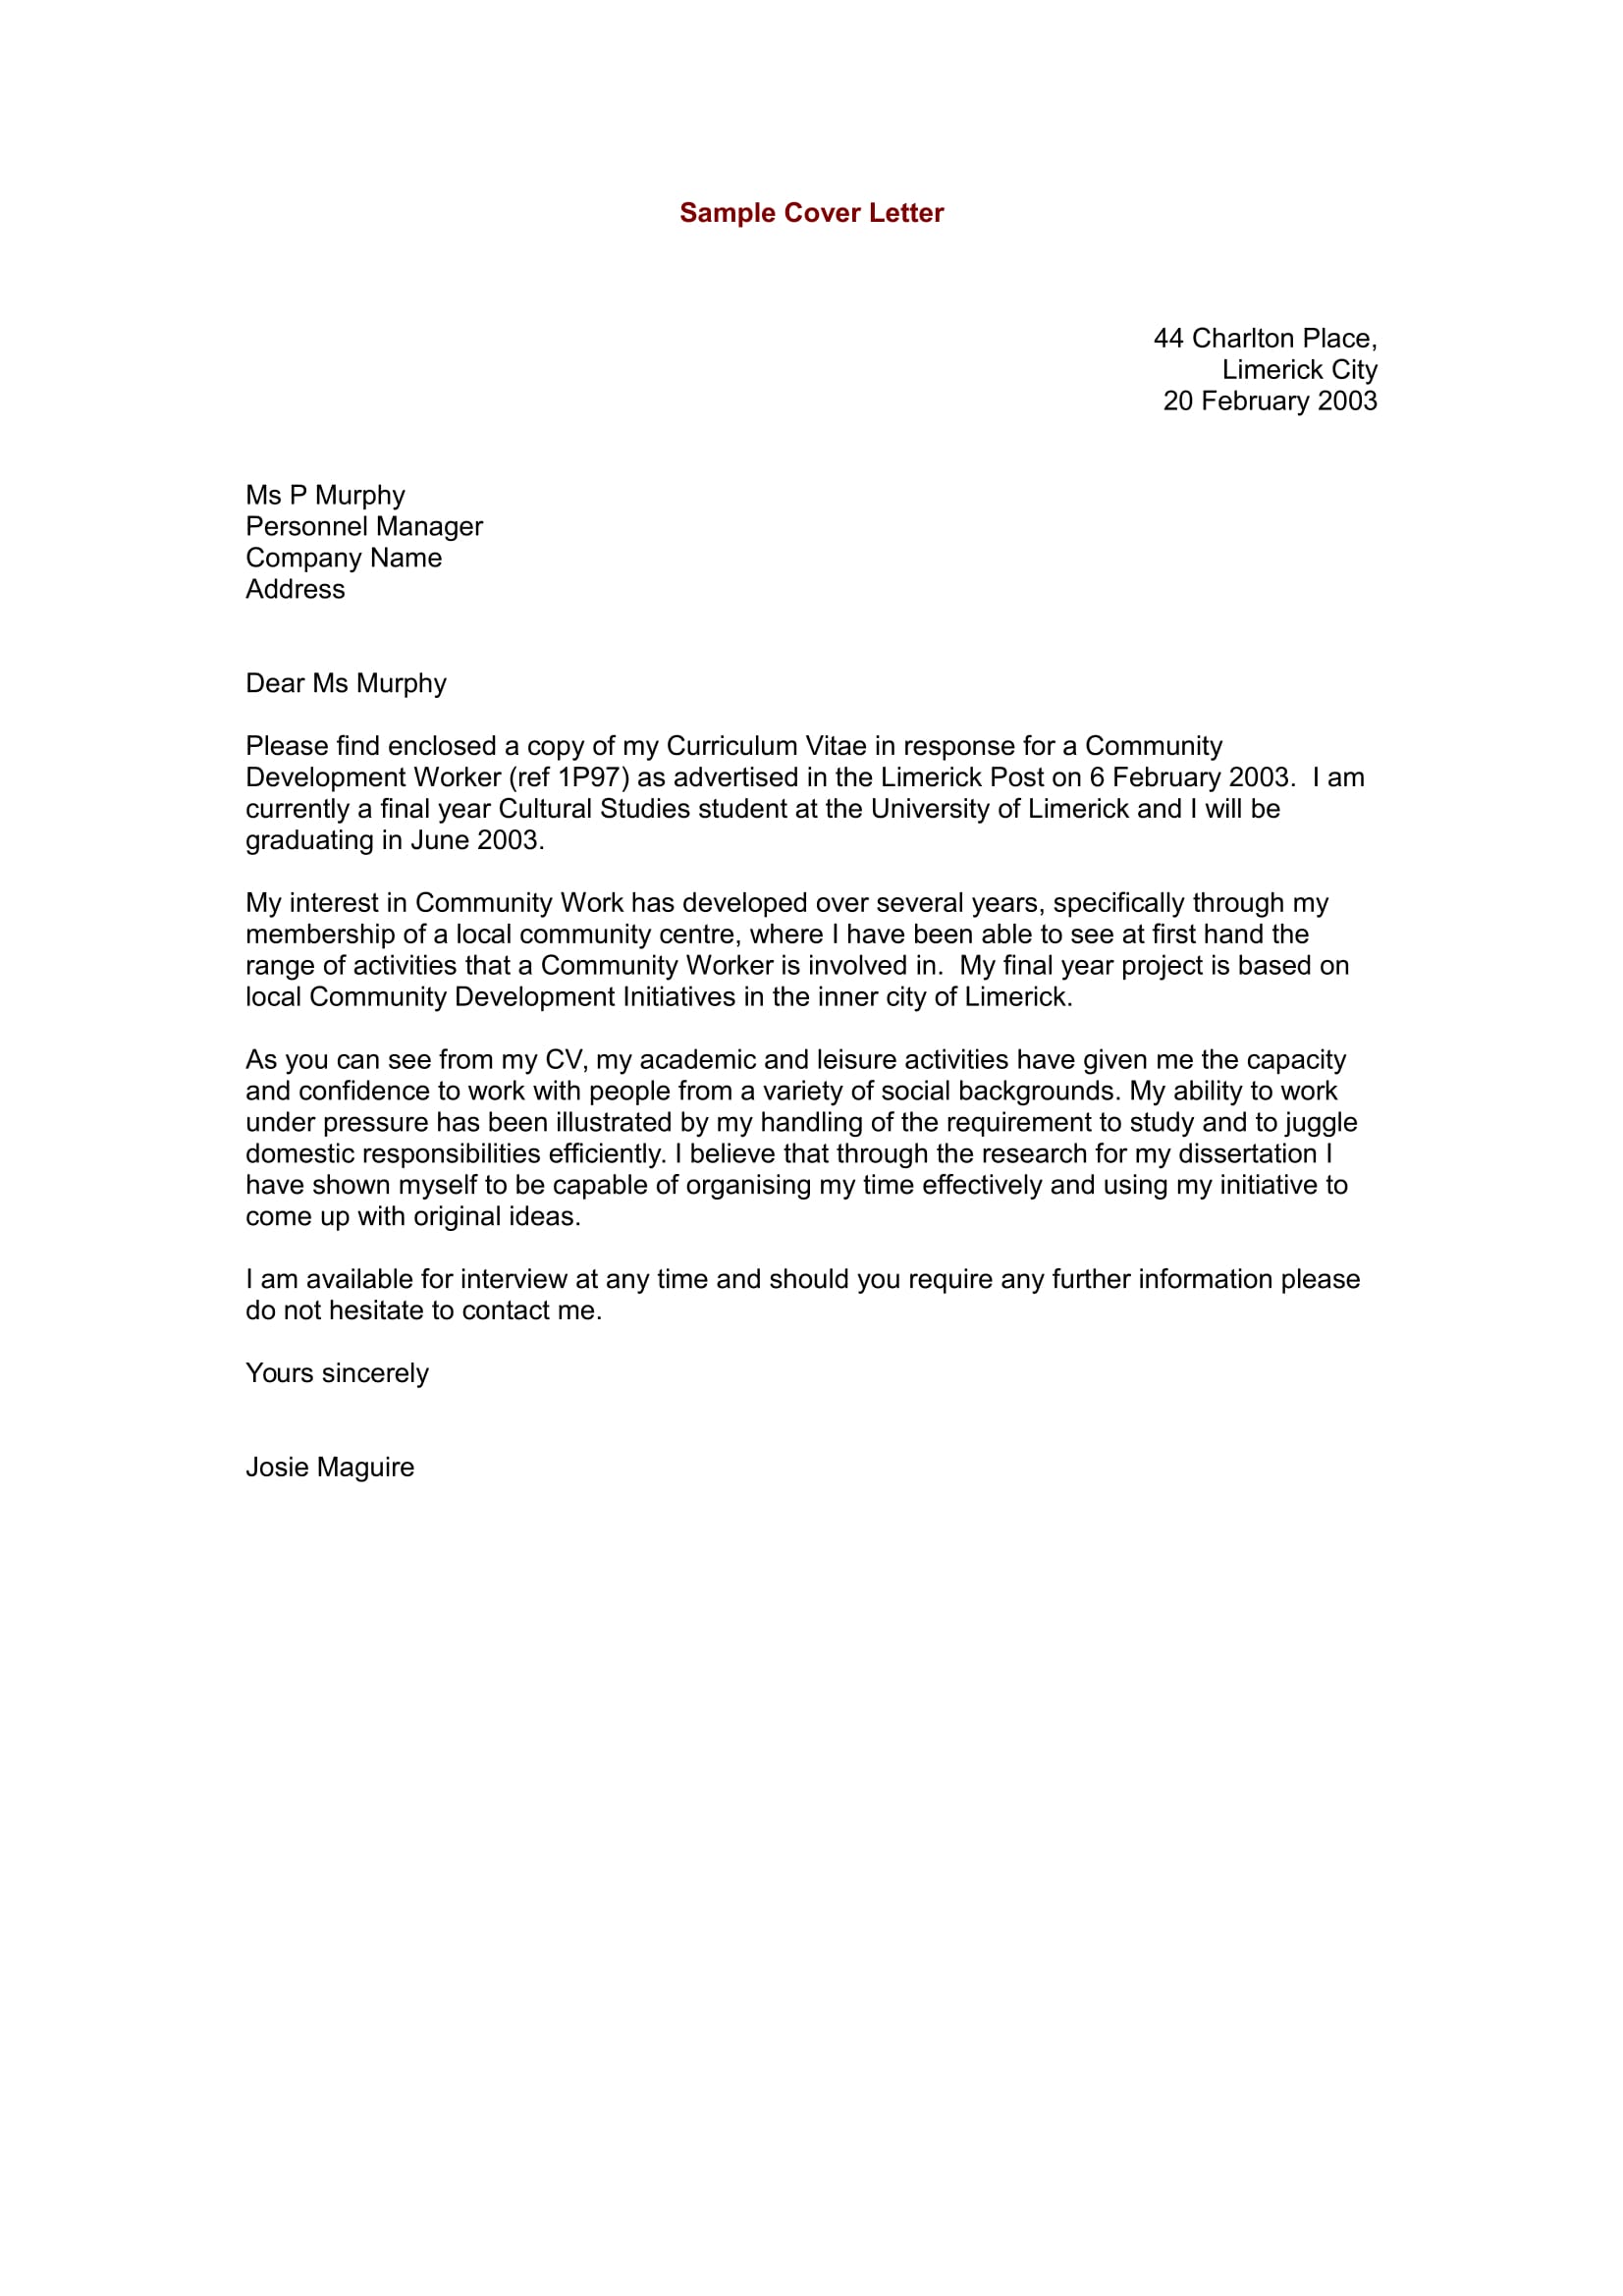 sample of an application letter for employment